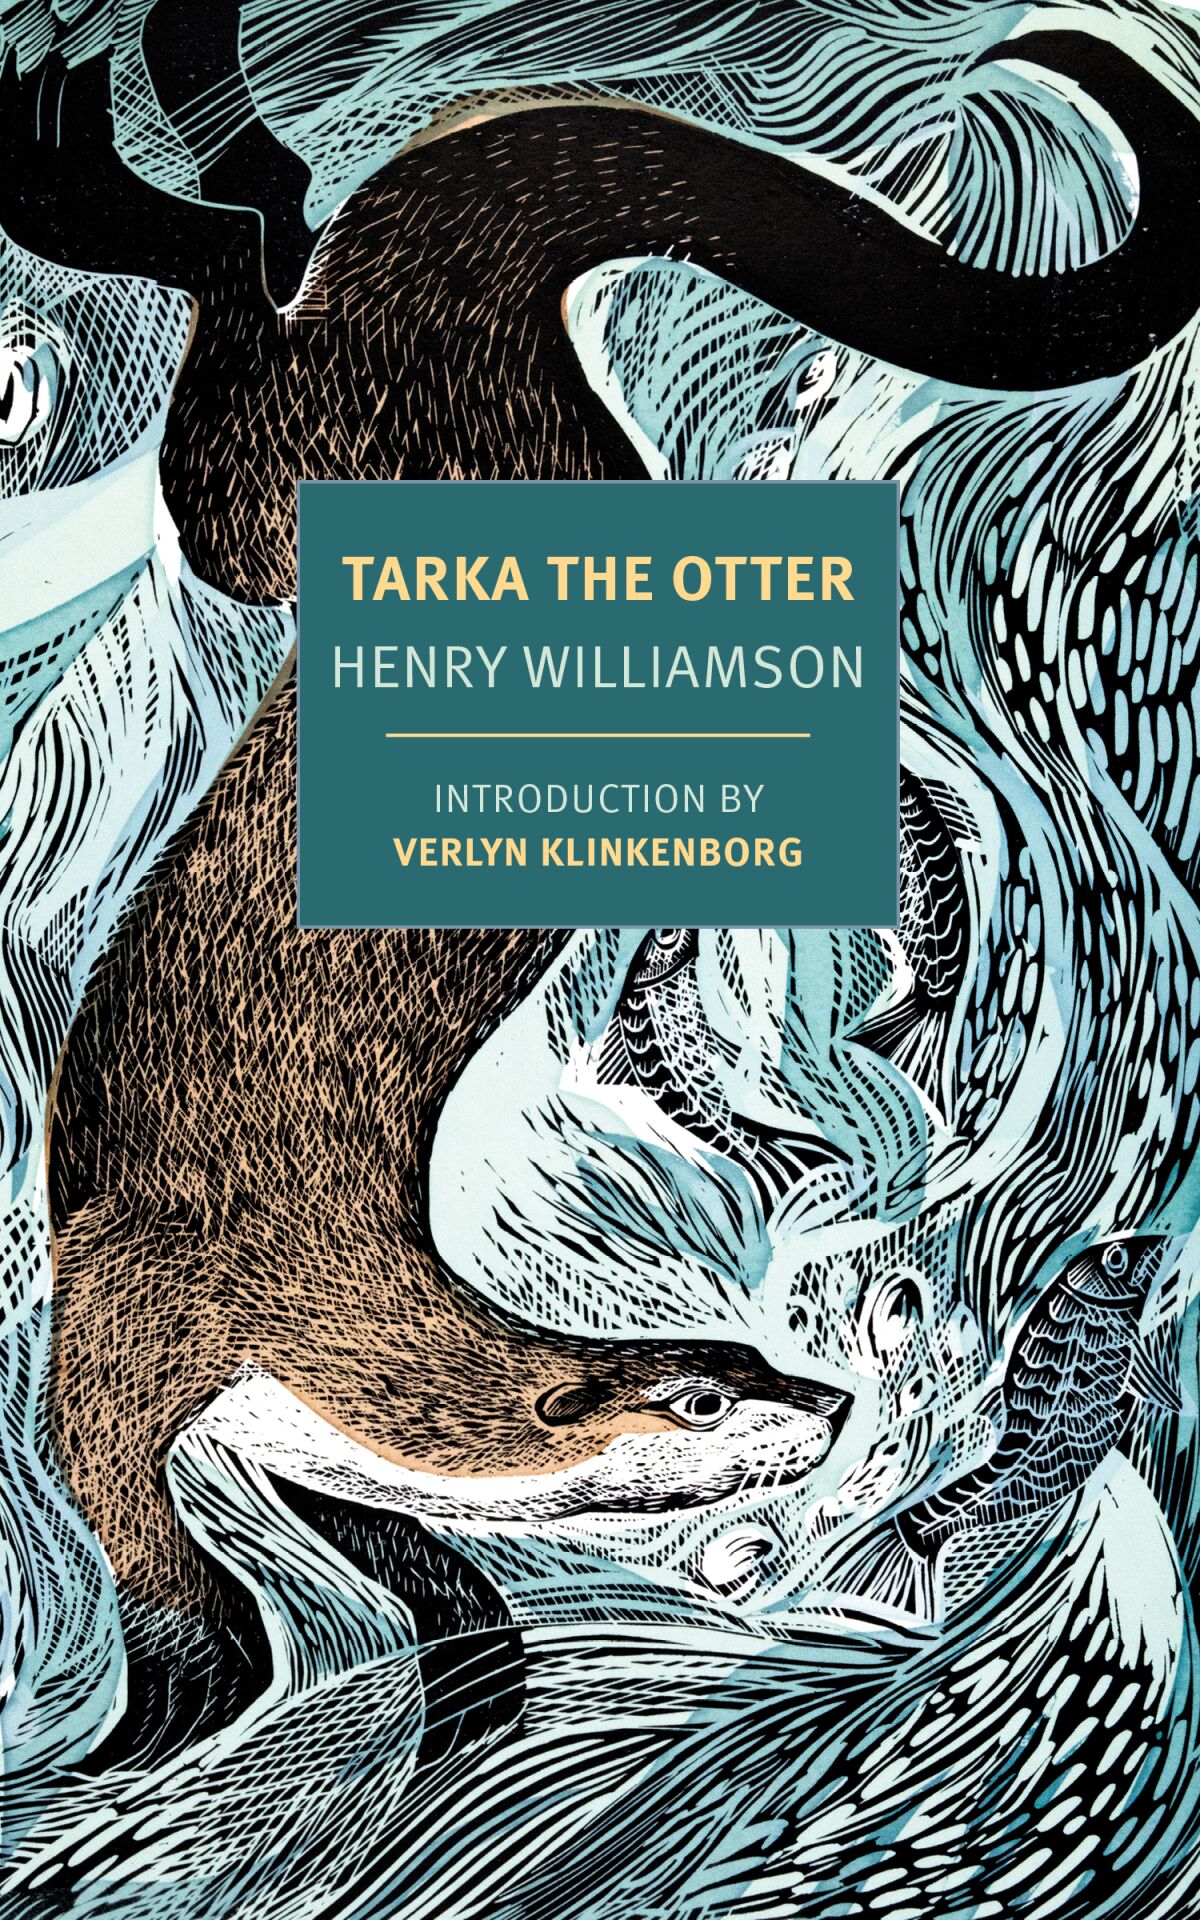 "Tarka the Otter," by Henry Williamson, cover.